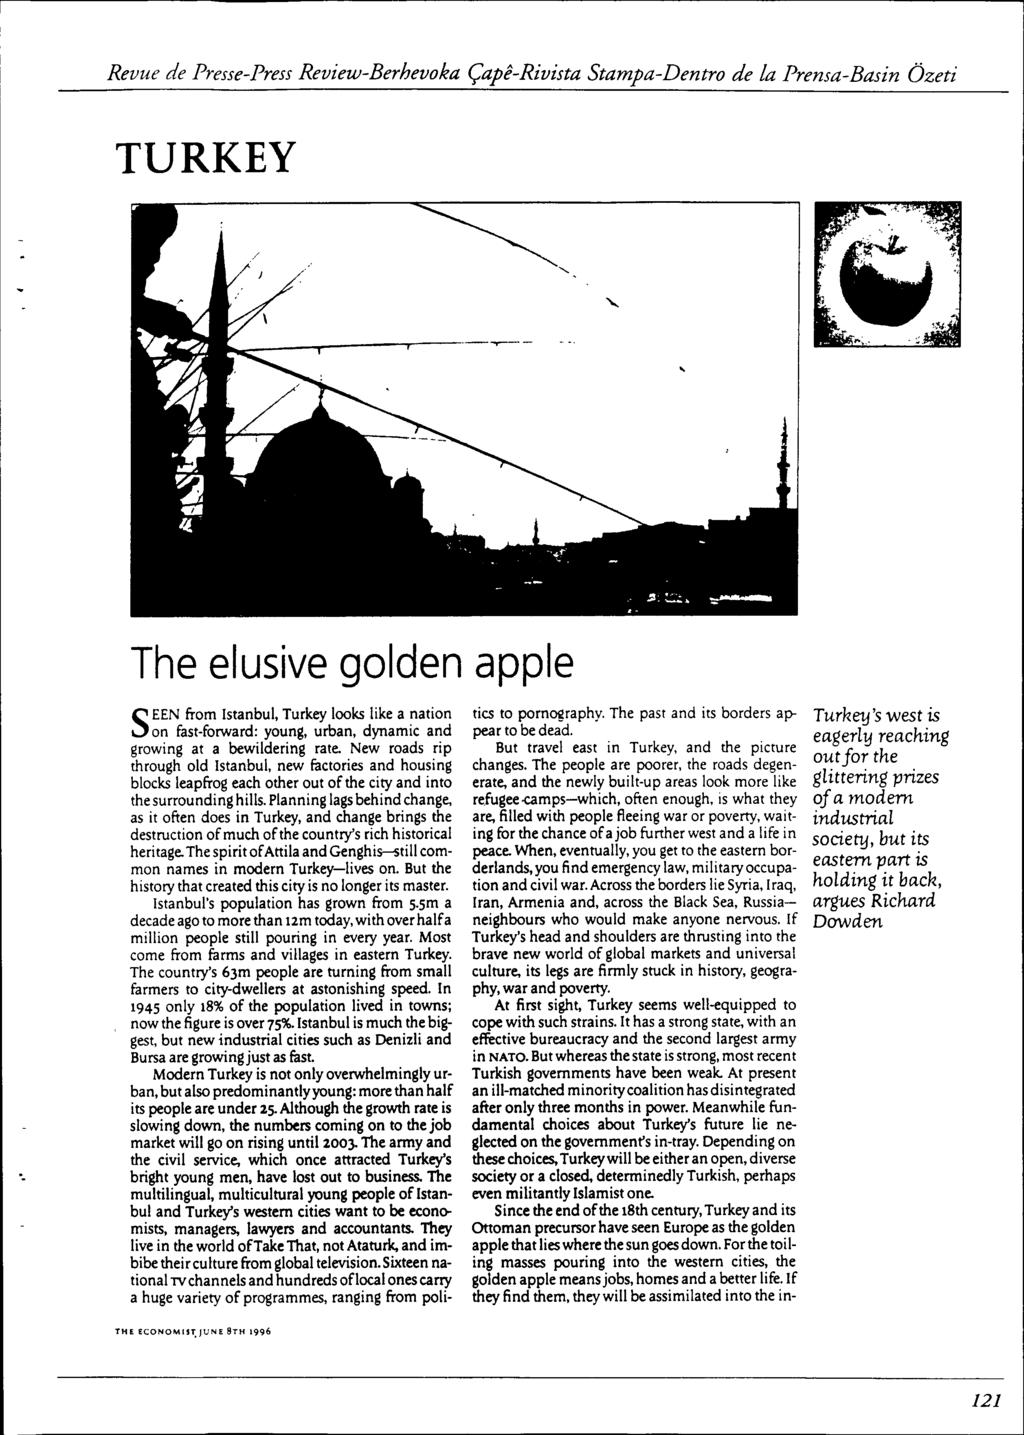 TURKEY '. The elusive golden apple SEEN from Istanbul, Turkey looks like a nation on fast-forward: young, urban, dynamic and growing at a bewildering rate.